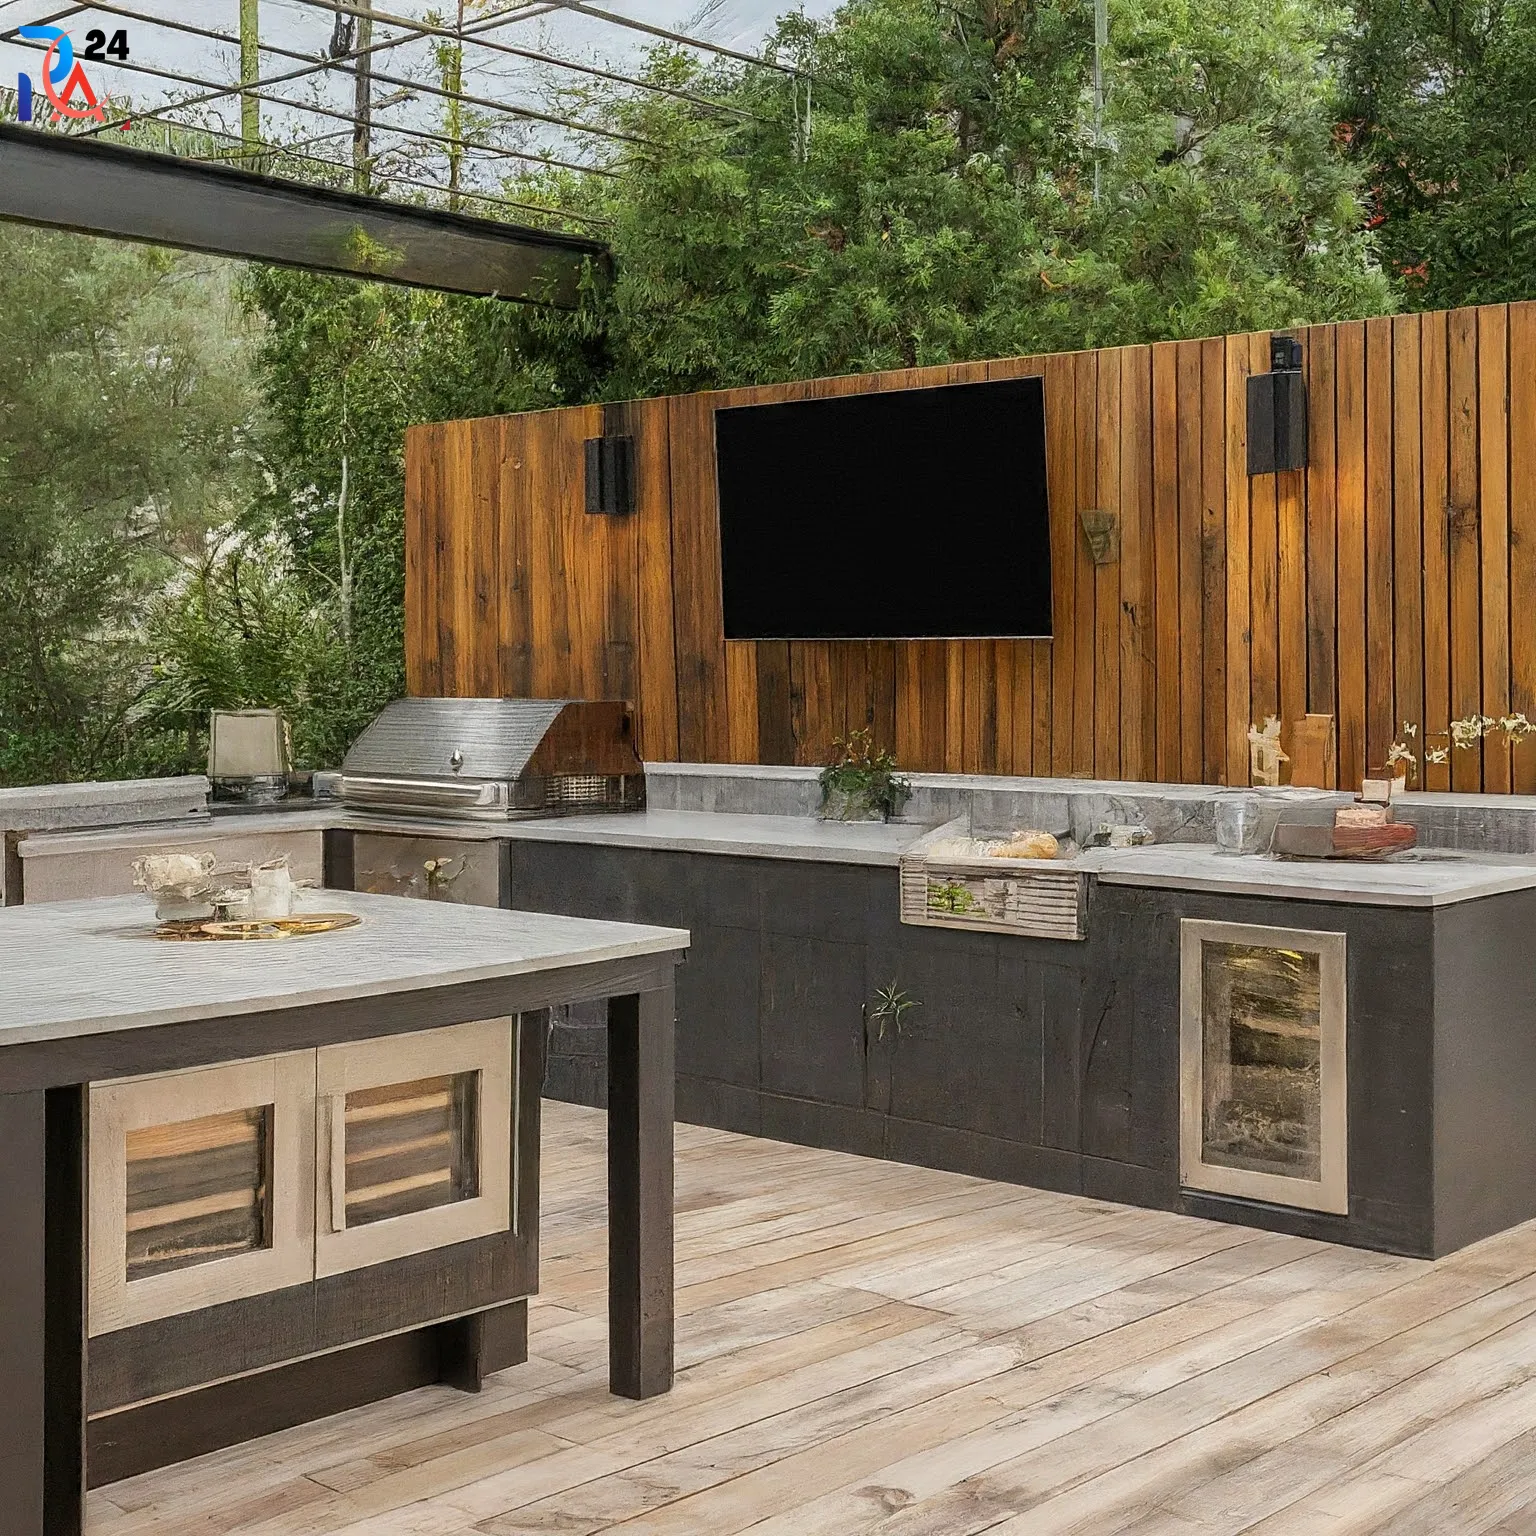 outdoor kitchen ideas with outdoor television